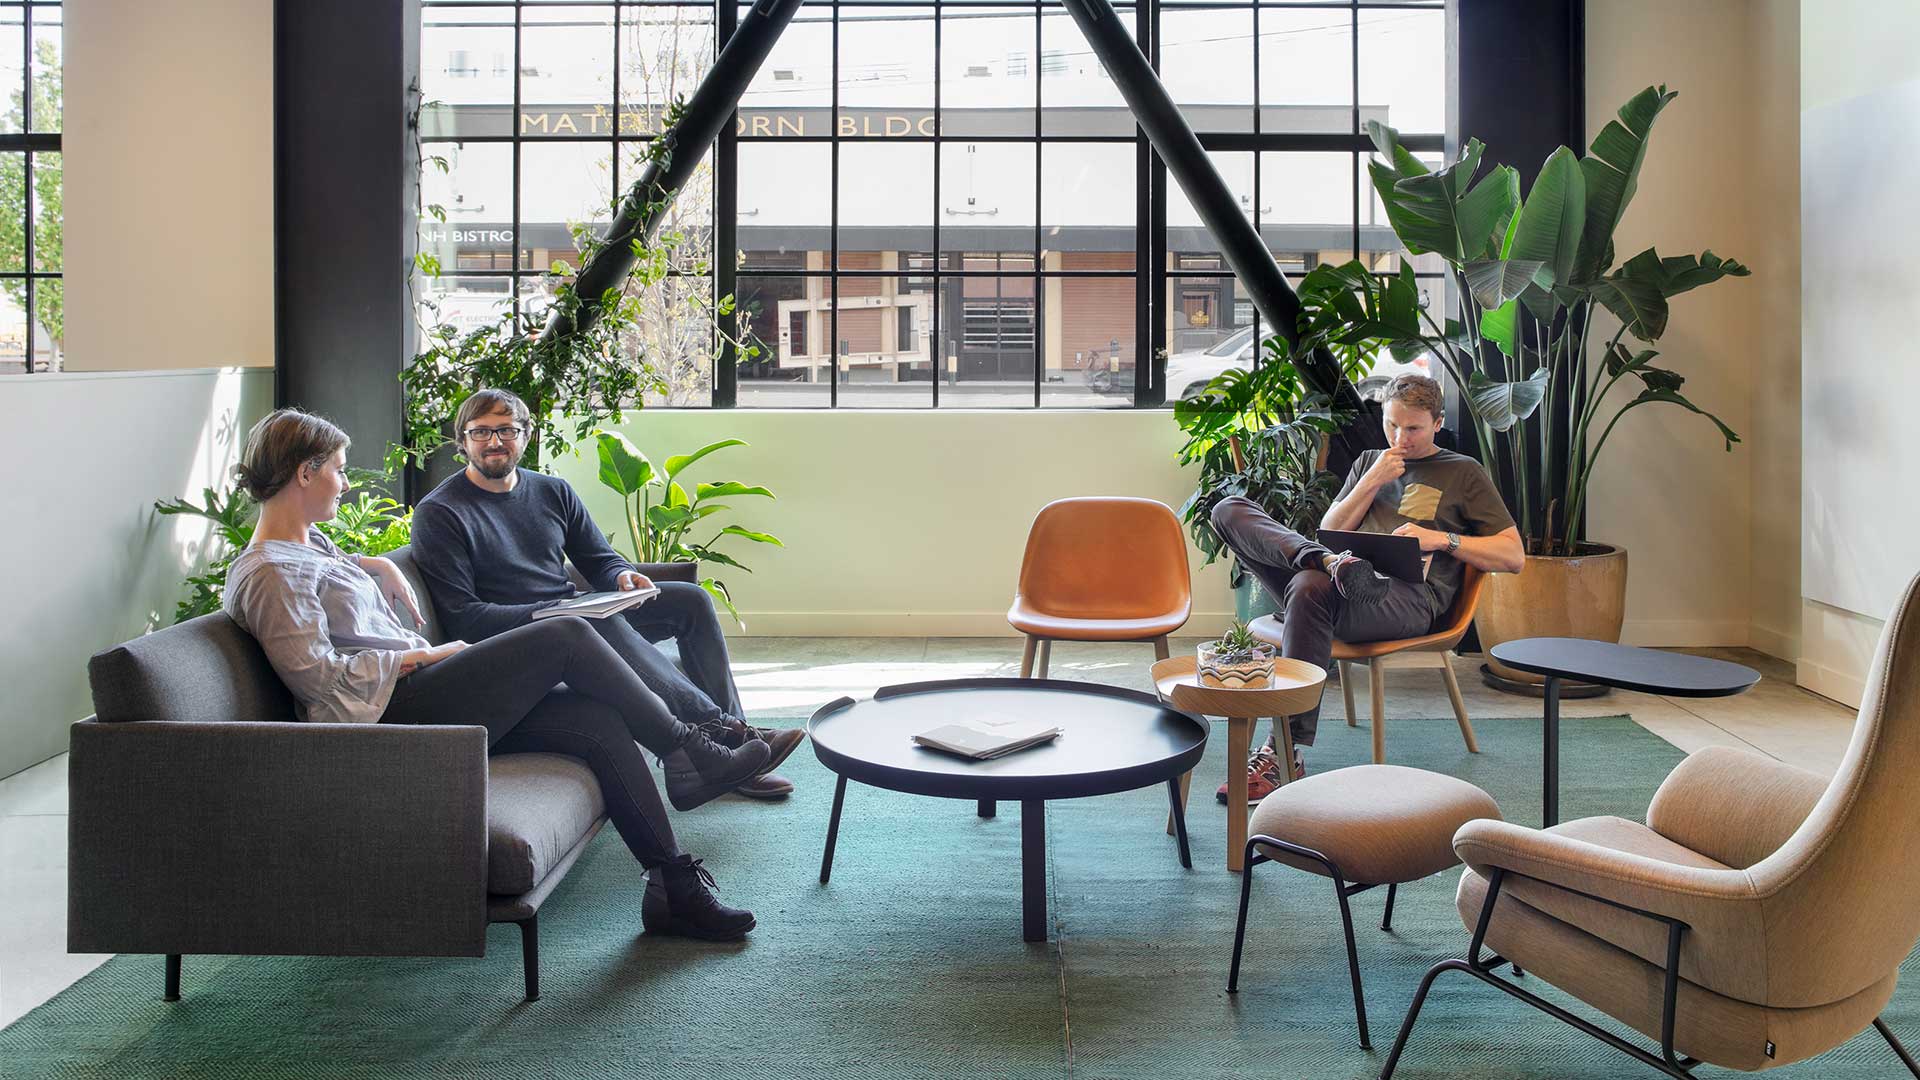 People sitting in an office lounge space